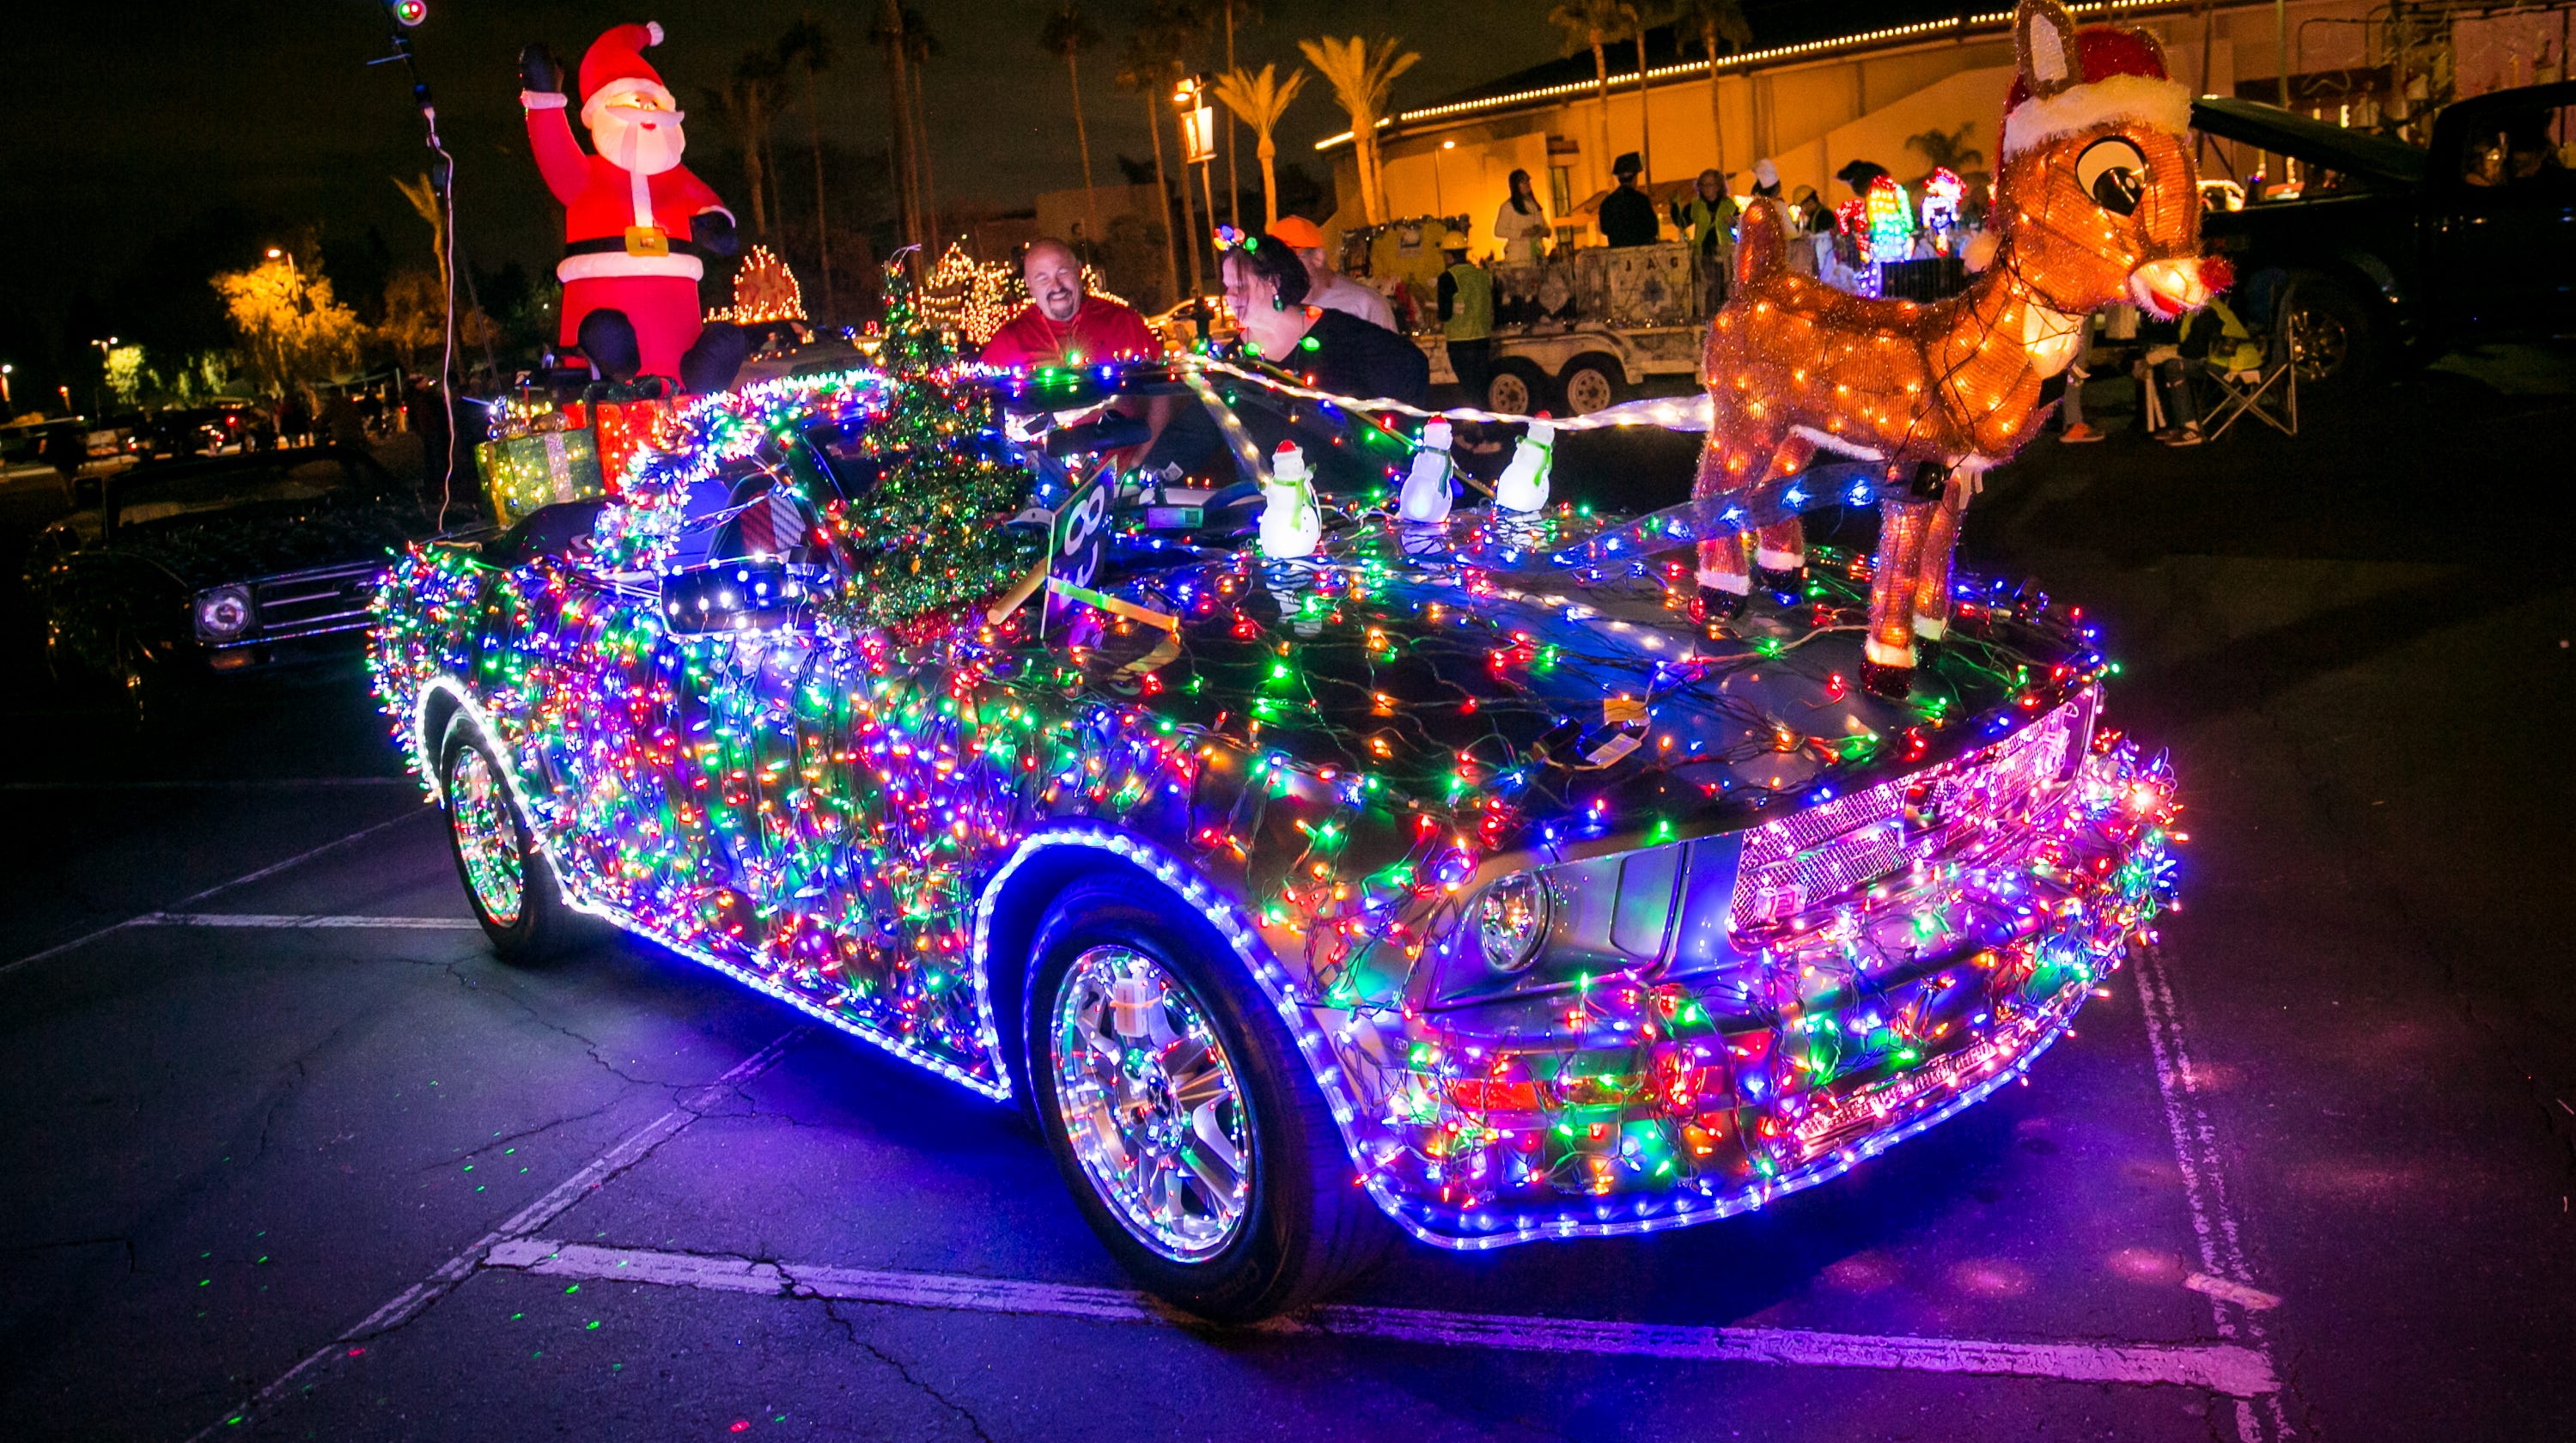 APS Electric Light Parade 2021 in Phoenix Route, road closures